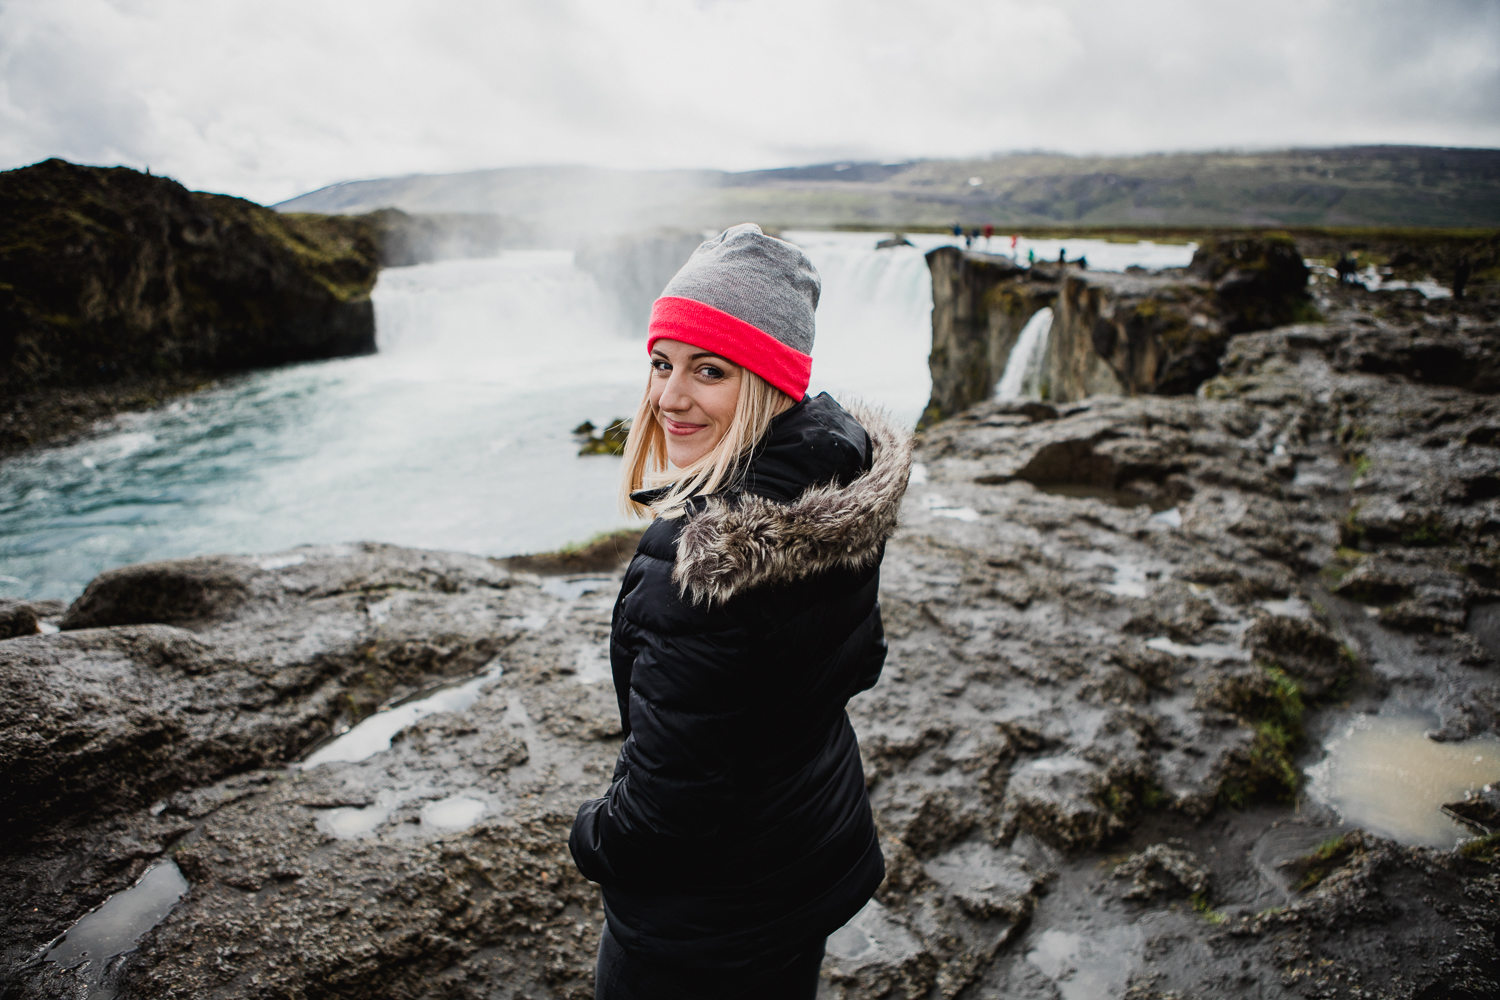 Snow, waterfalls and geysers galore